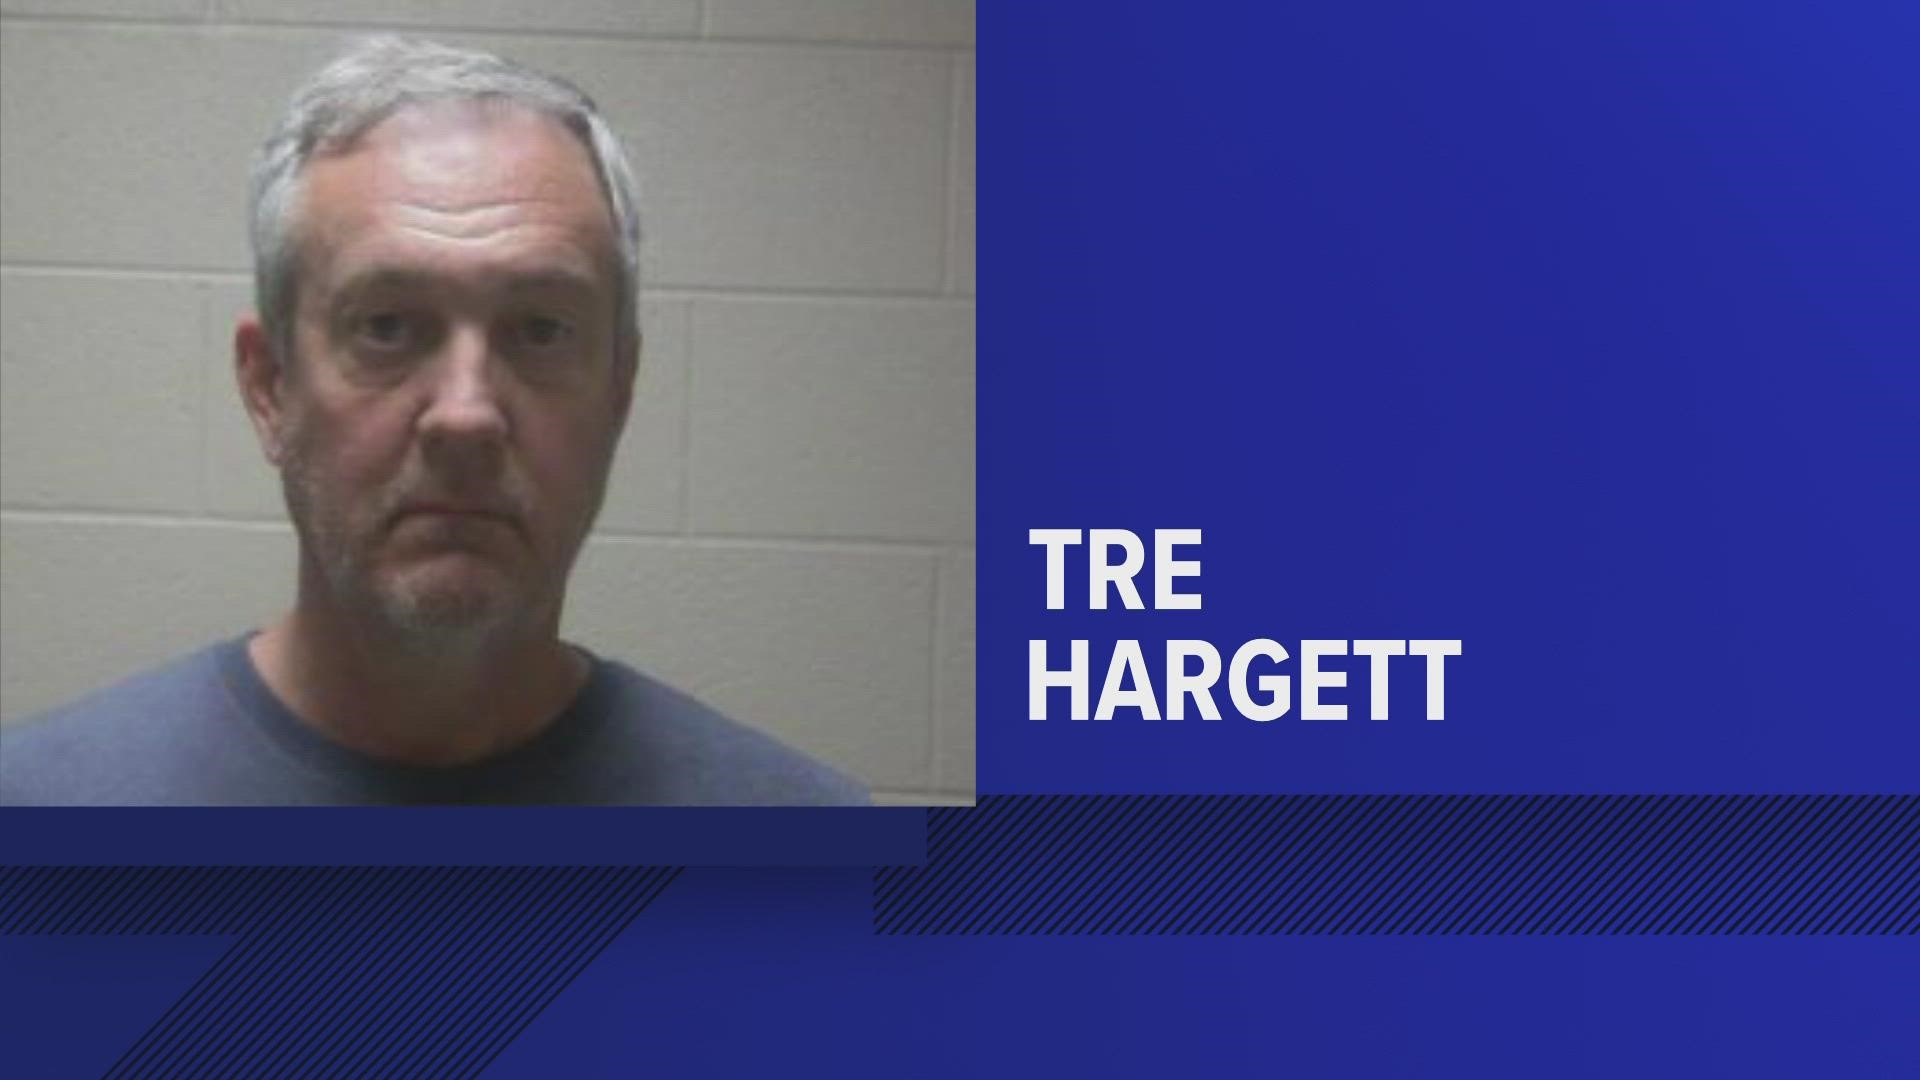 In a statement, Hargett said he offered a best interest plea in the case on Thursday, which amounts to pleading guilty while maintaining innocence.